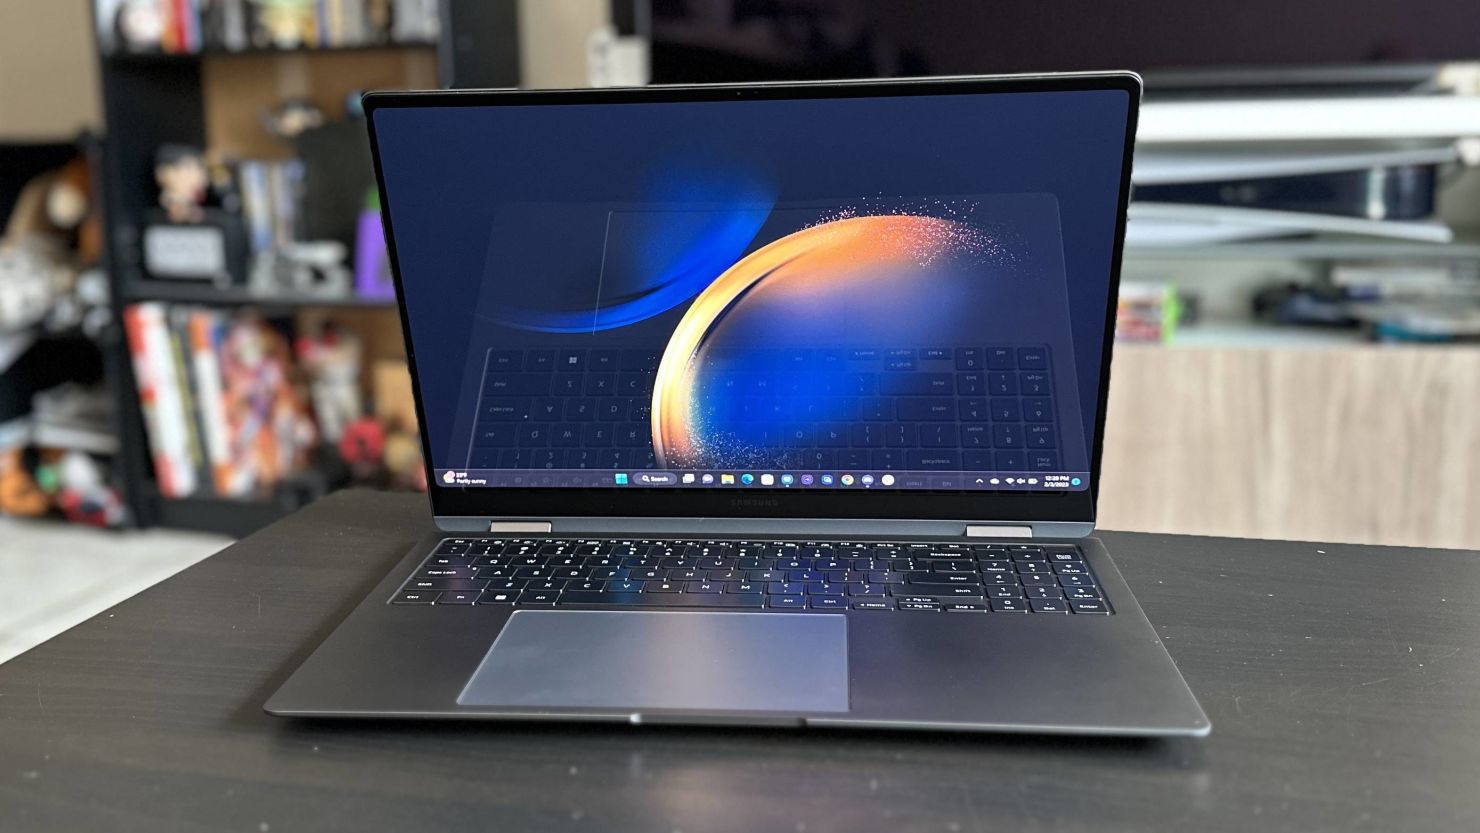 Samsung Galaxy Book 3 Pro review: The perfect blend of power & portability